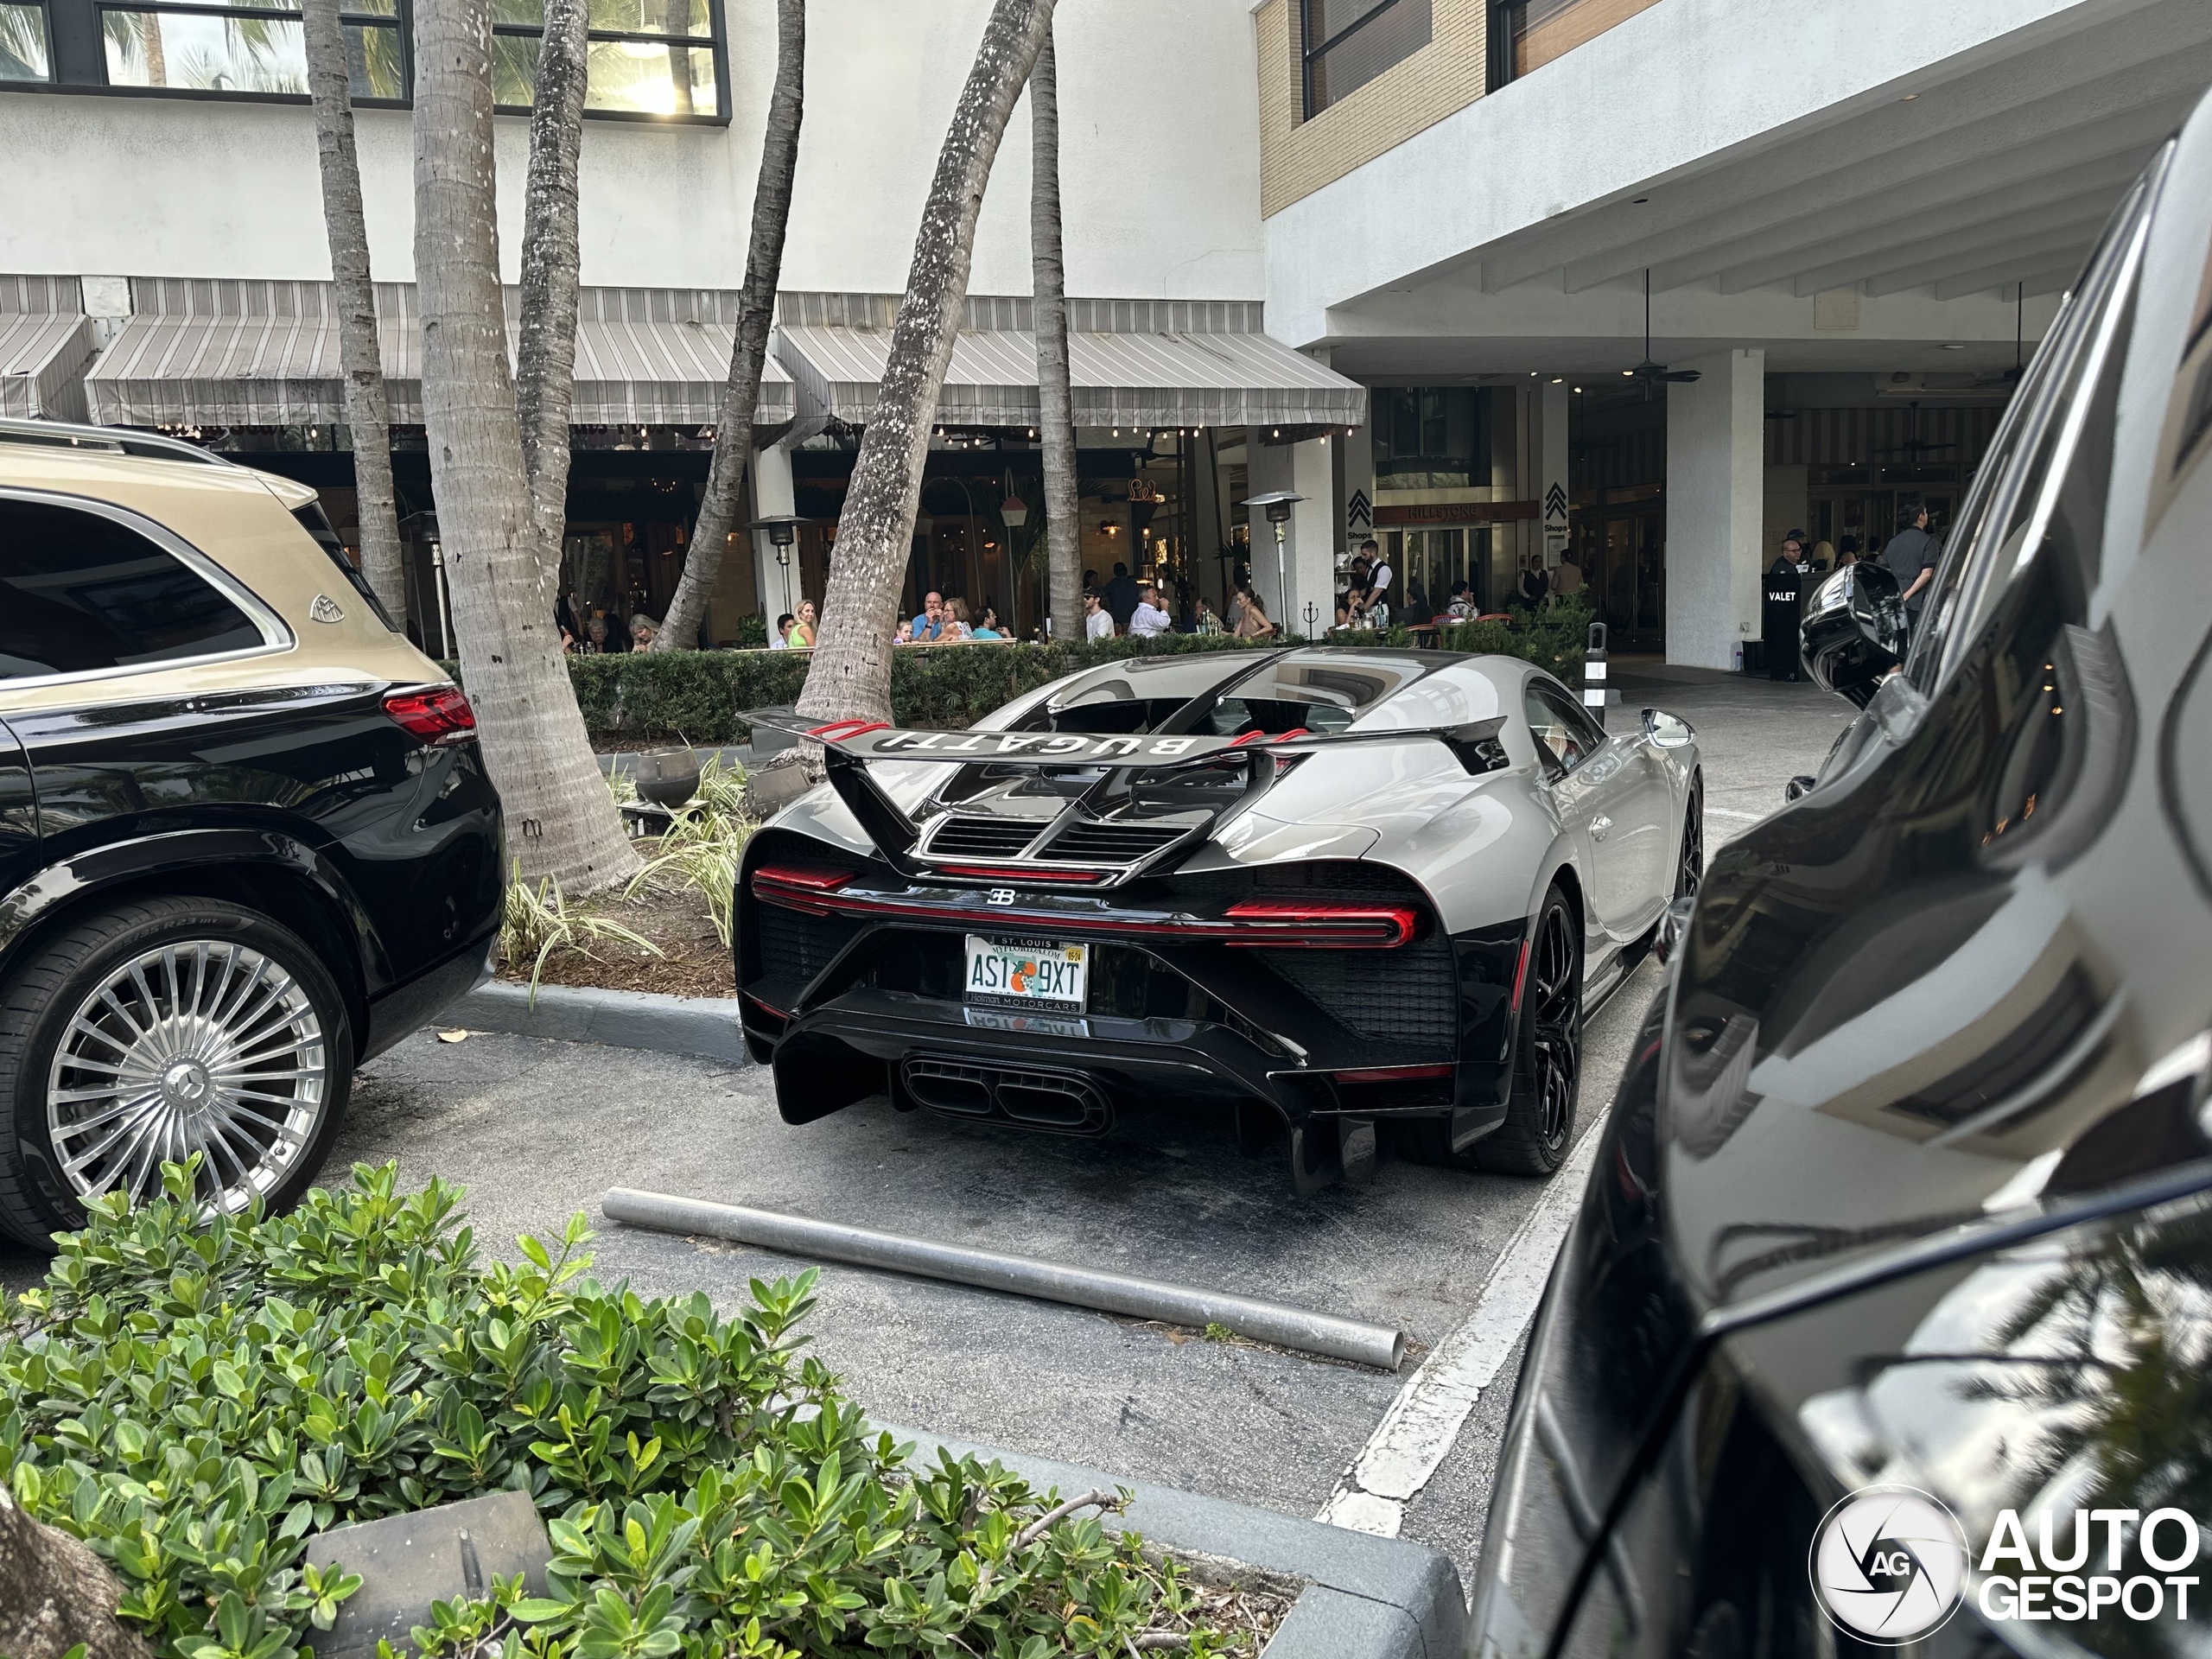 Once again, we see a sick Hypercar in Bal Harbour